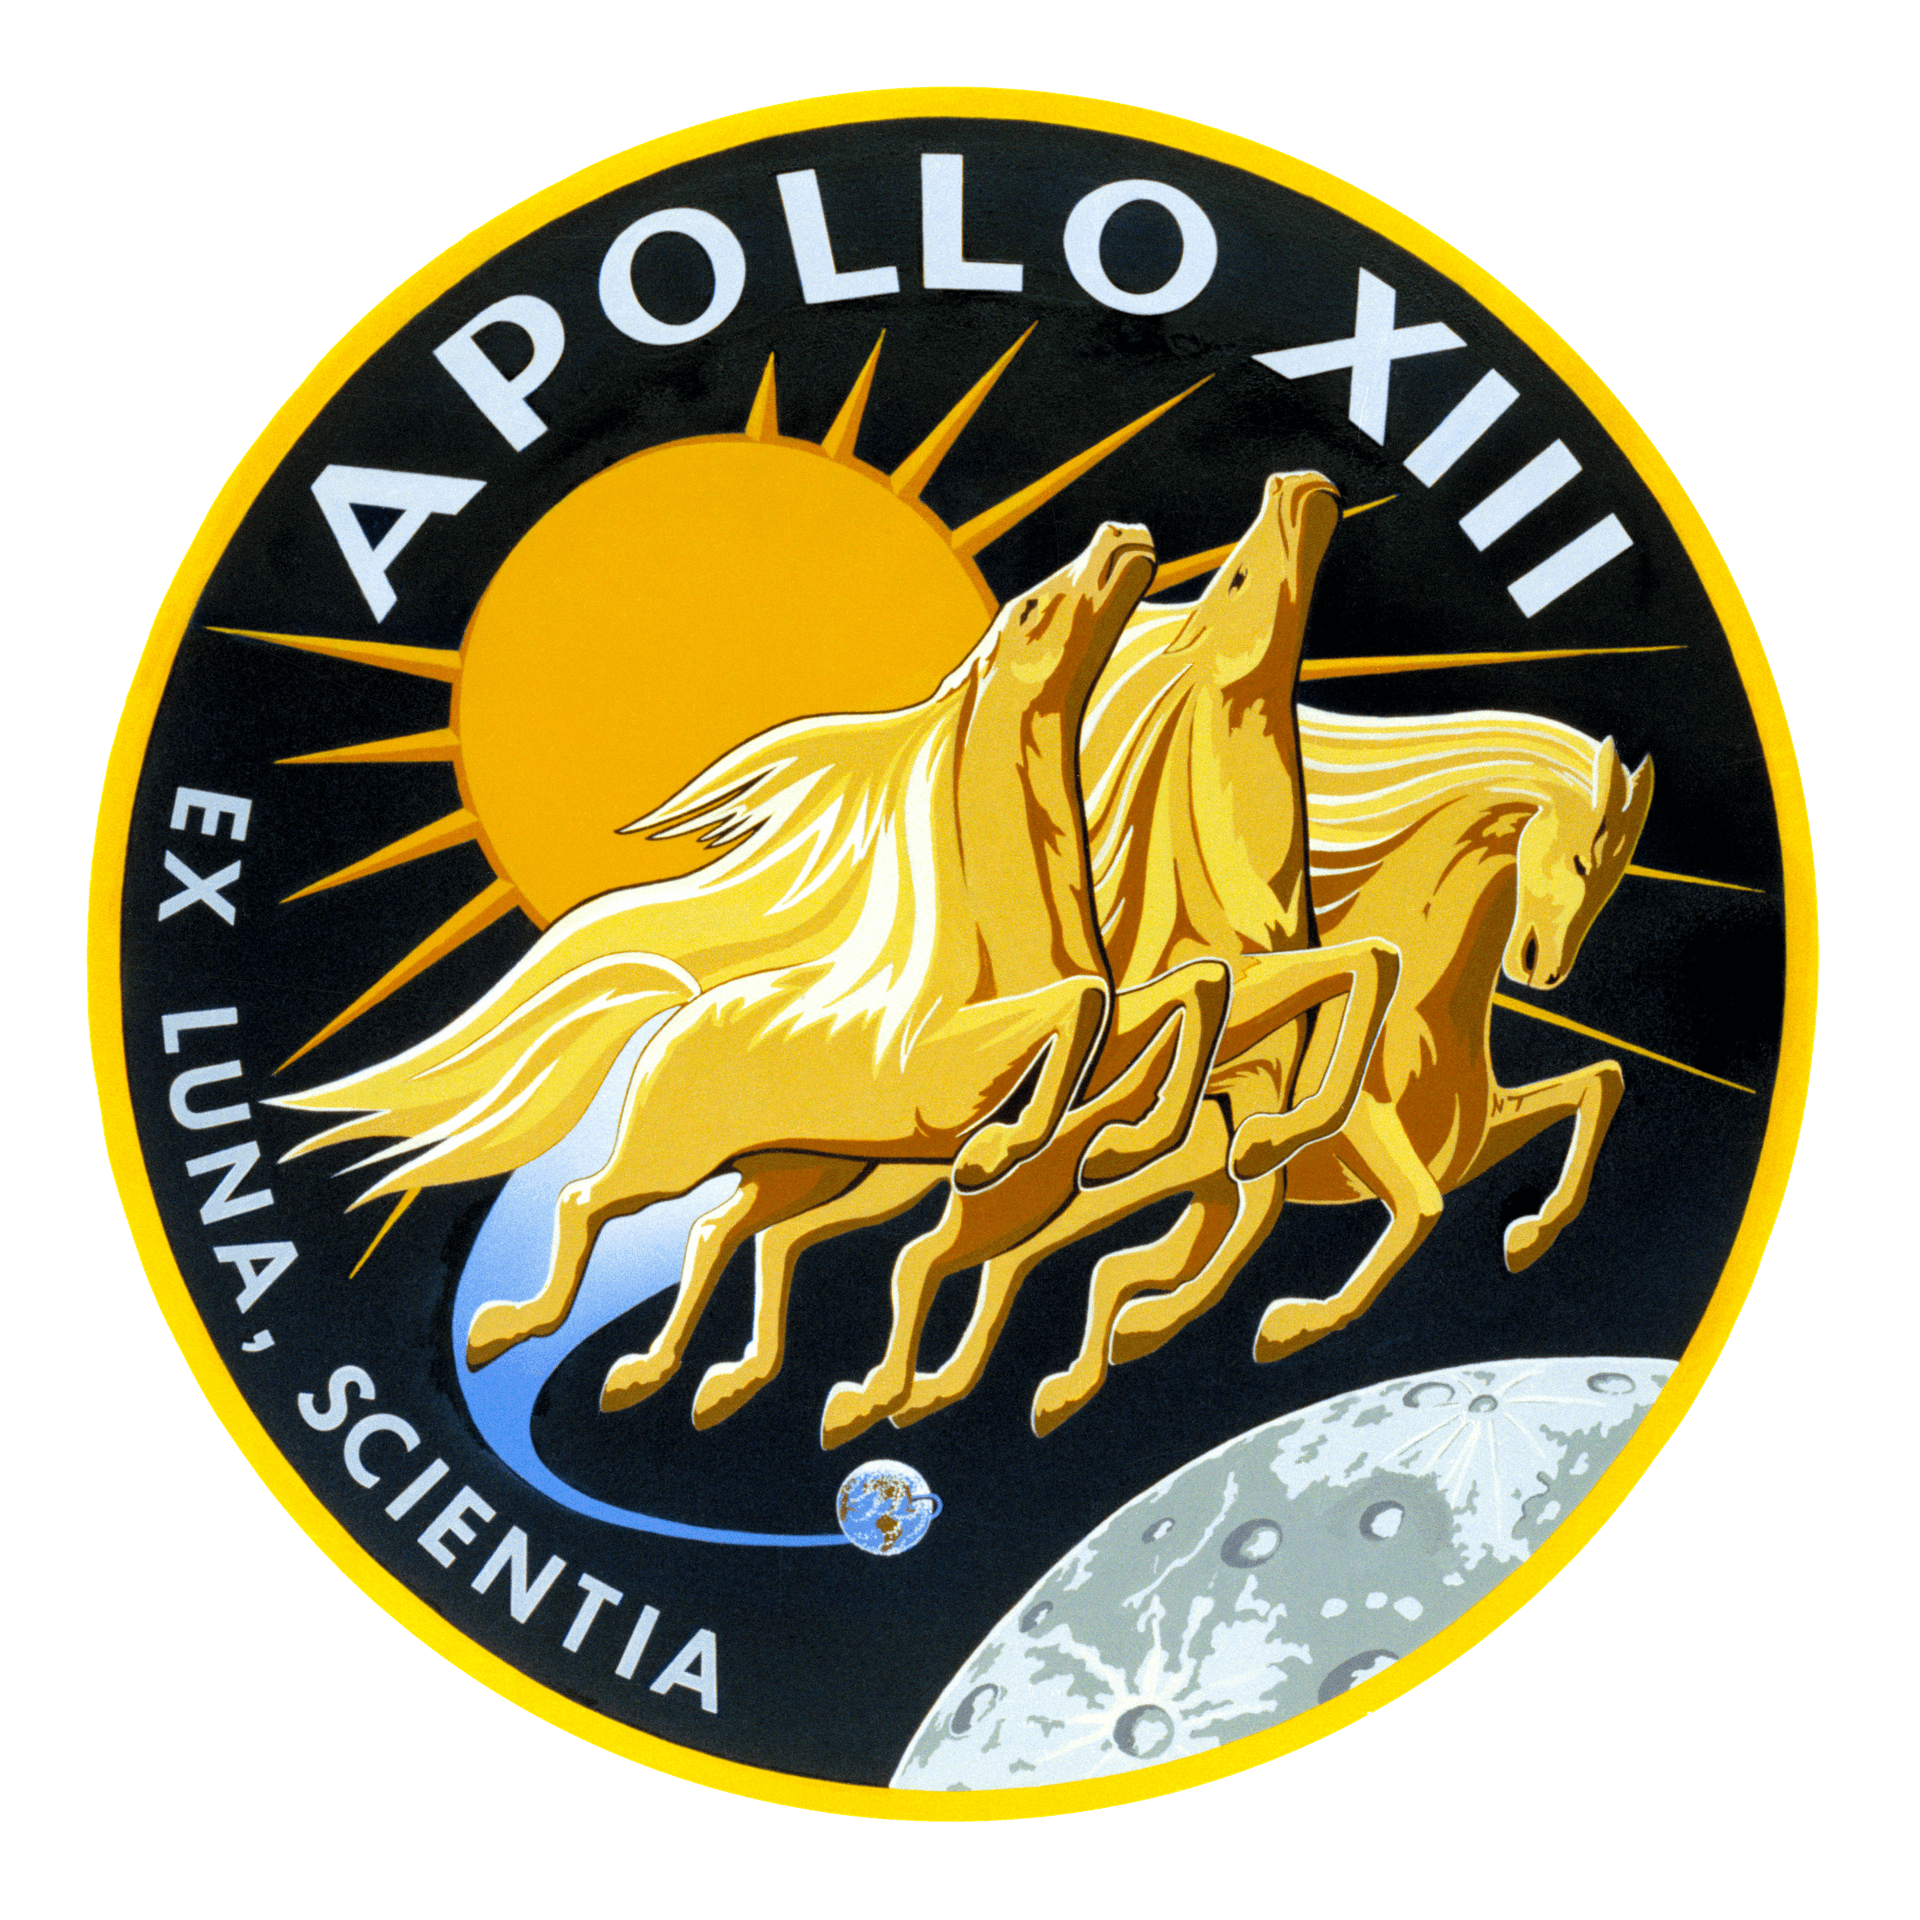 Mission patch for Apollo 13